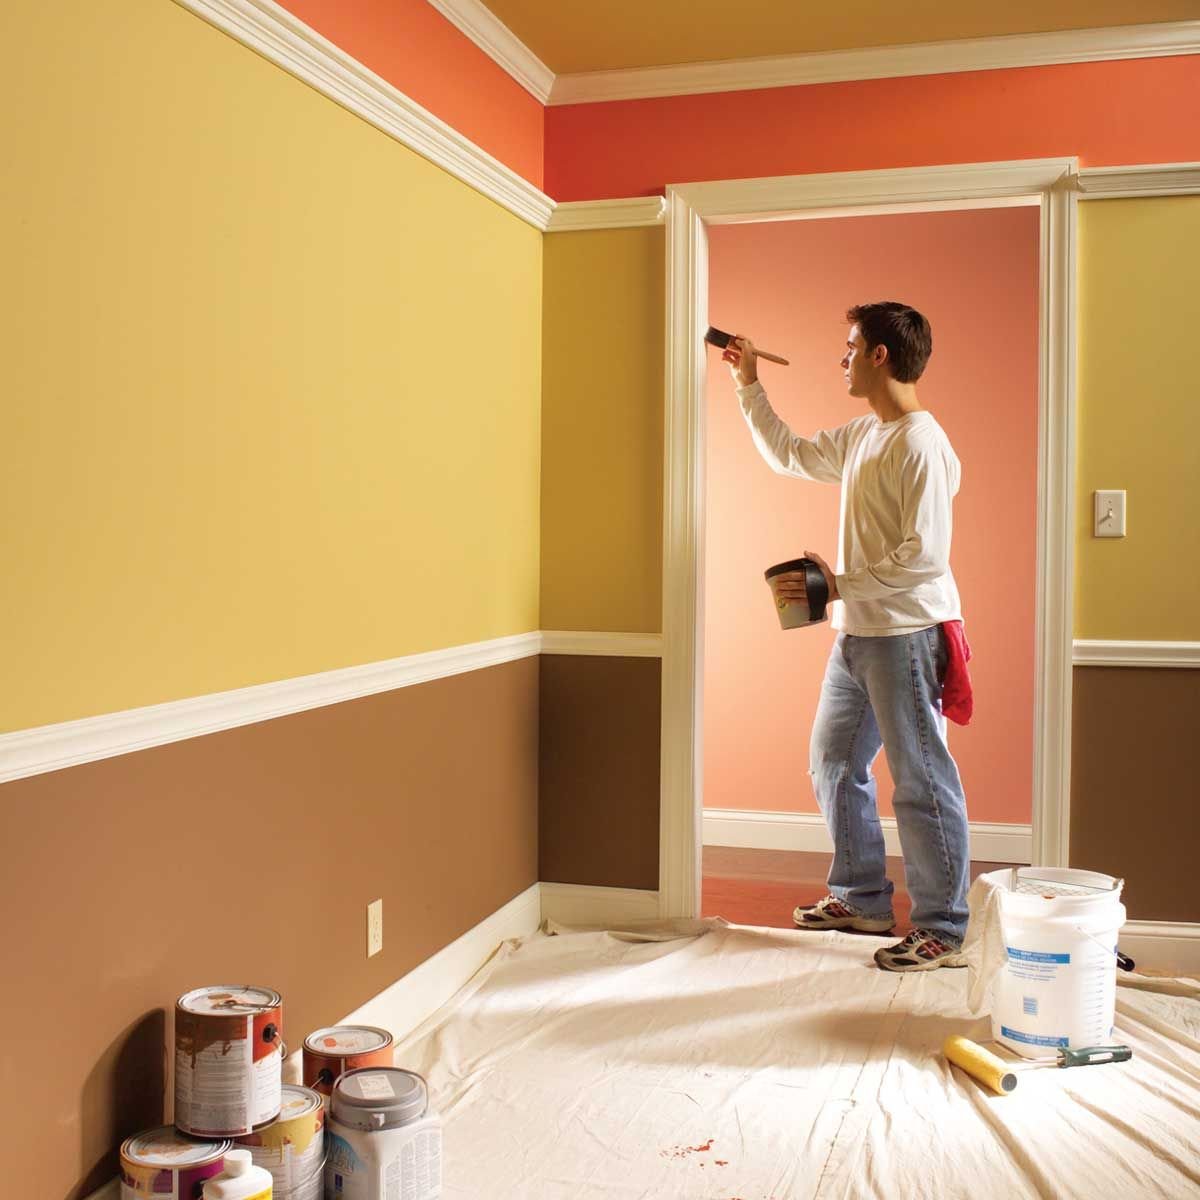 6 Expert Tips for Hiring Reliable and Trustworthy House Painters